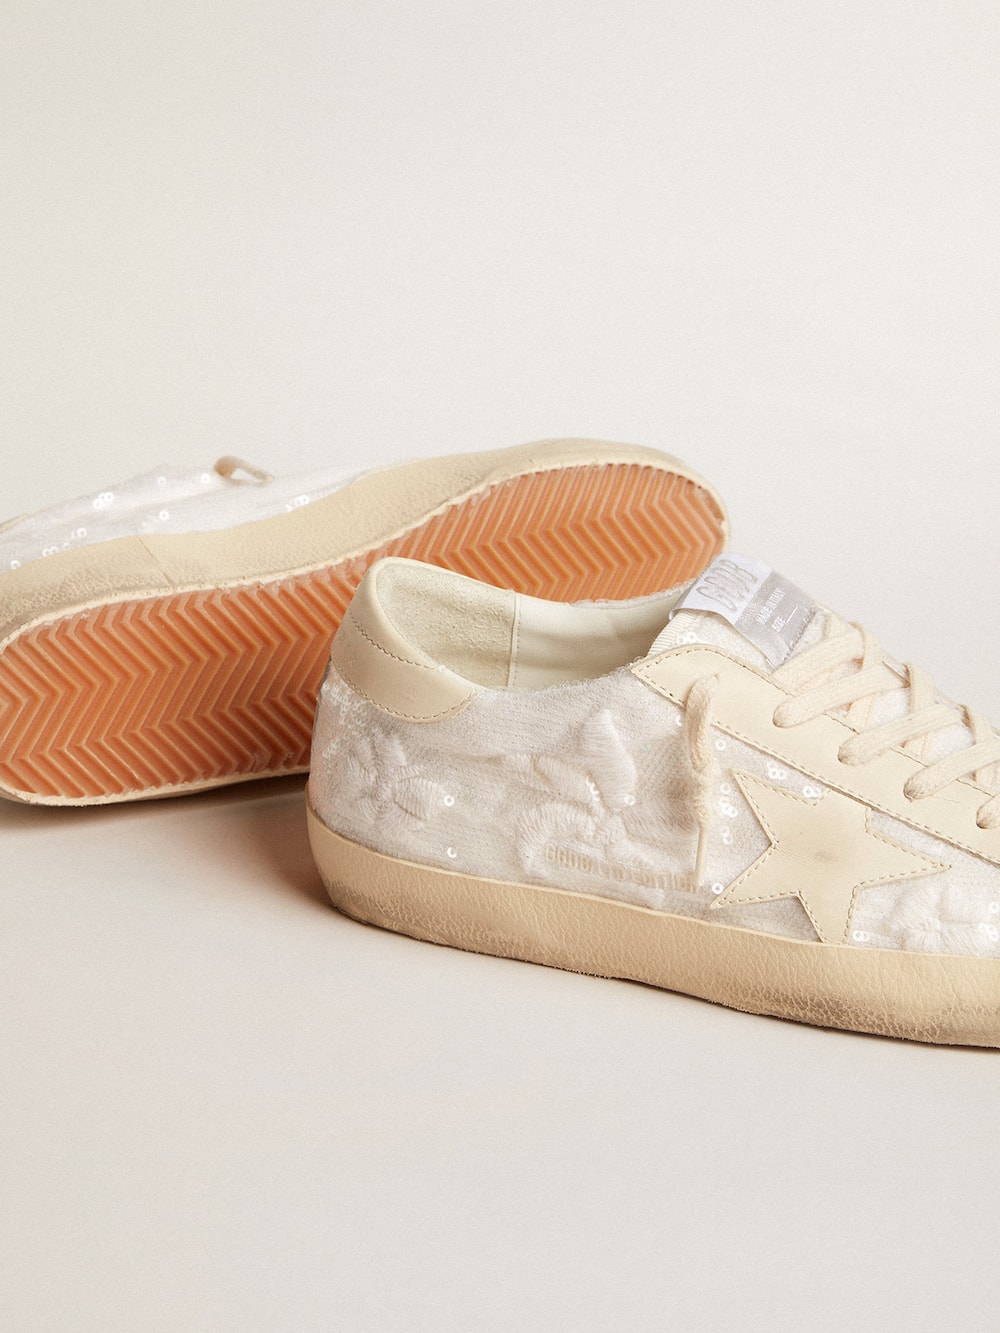 Golden Goose - Super-Star LTD in white sequins with leather star and embroidery in 